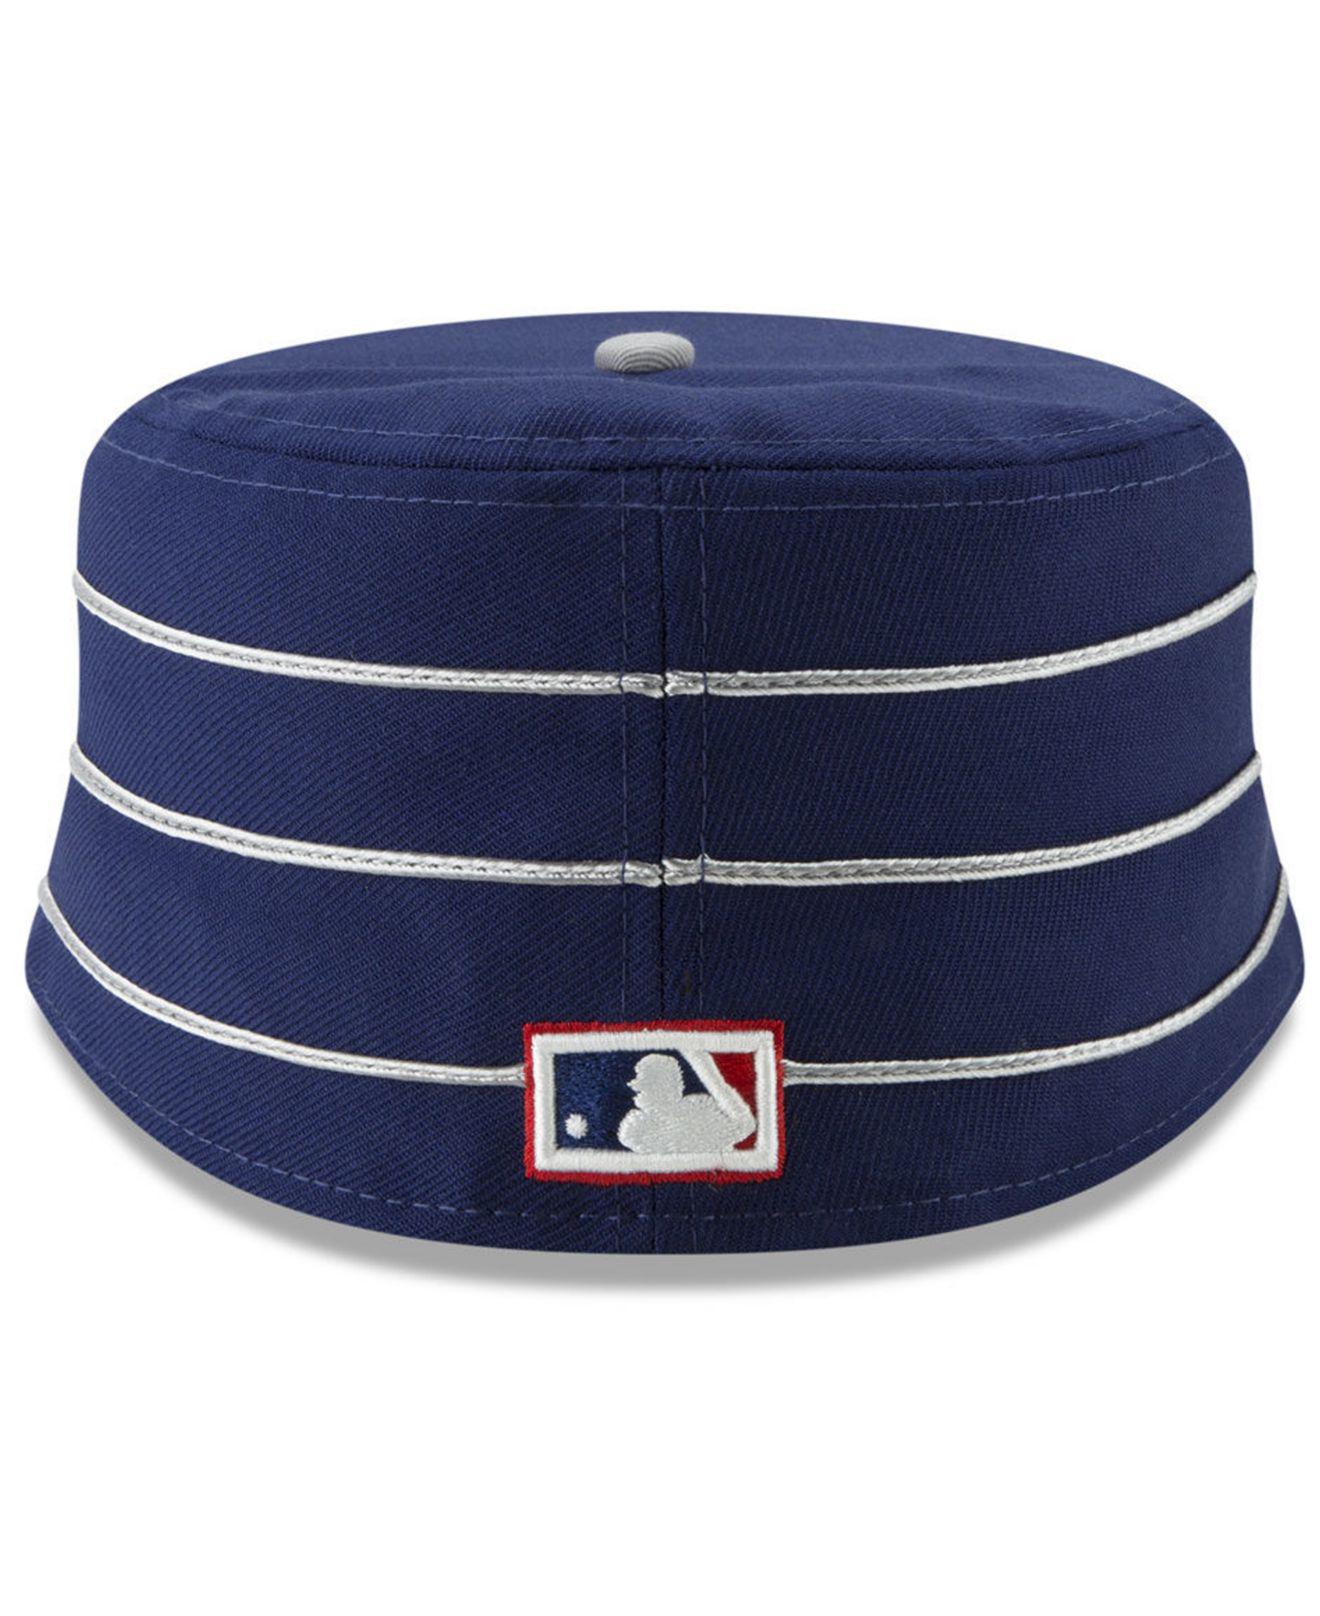 KTZ Los Angeles Dodgers Pillbox 59fifty-fitted Cap in Blue for Men